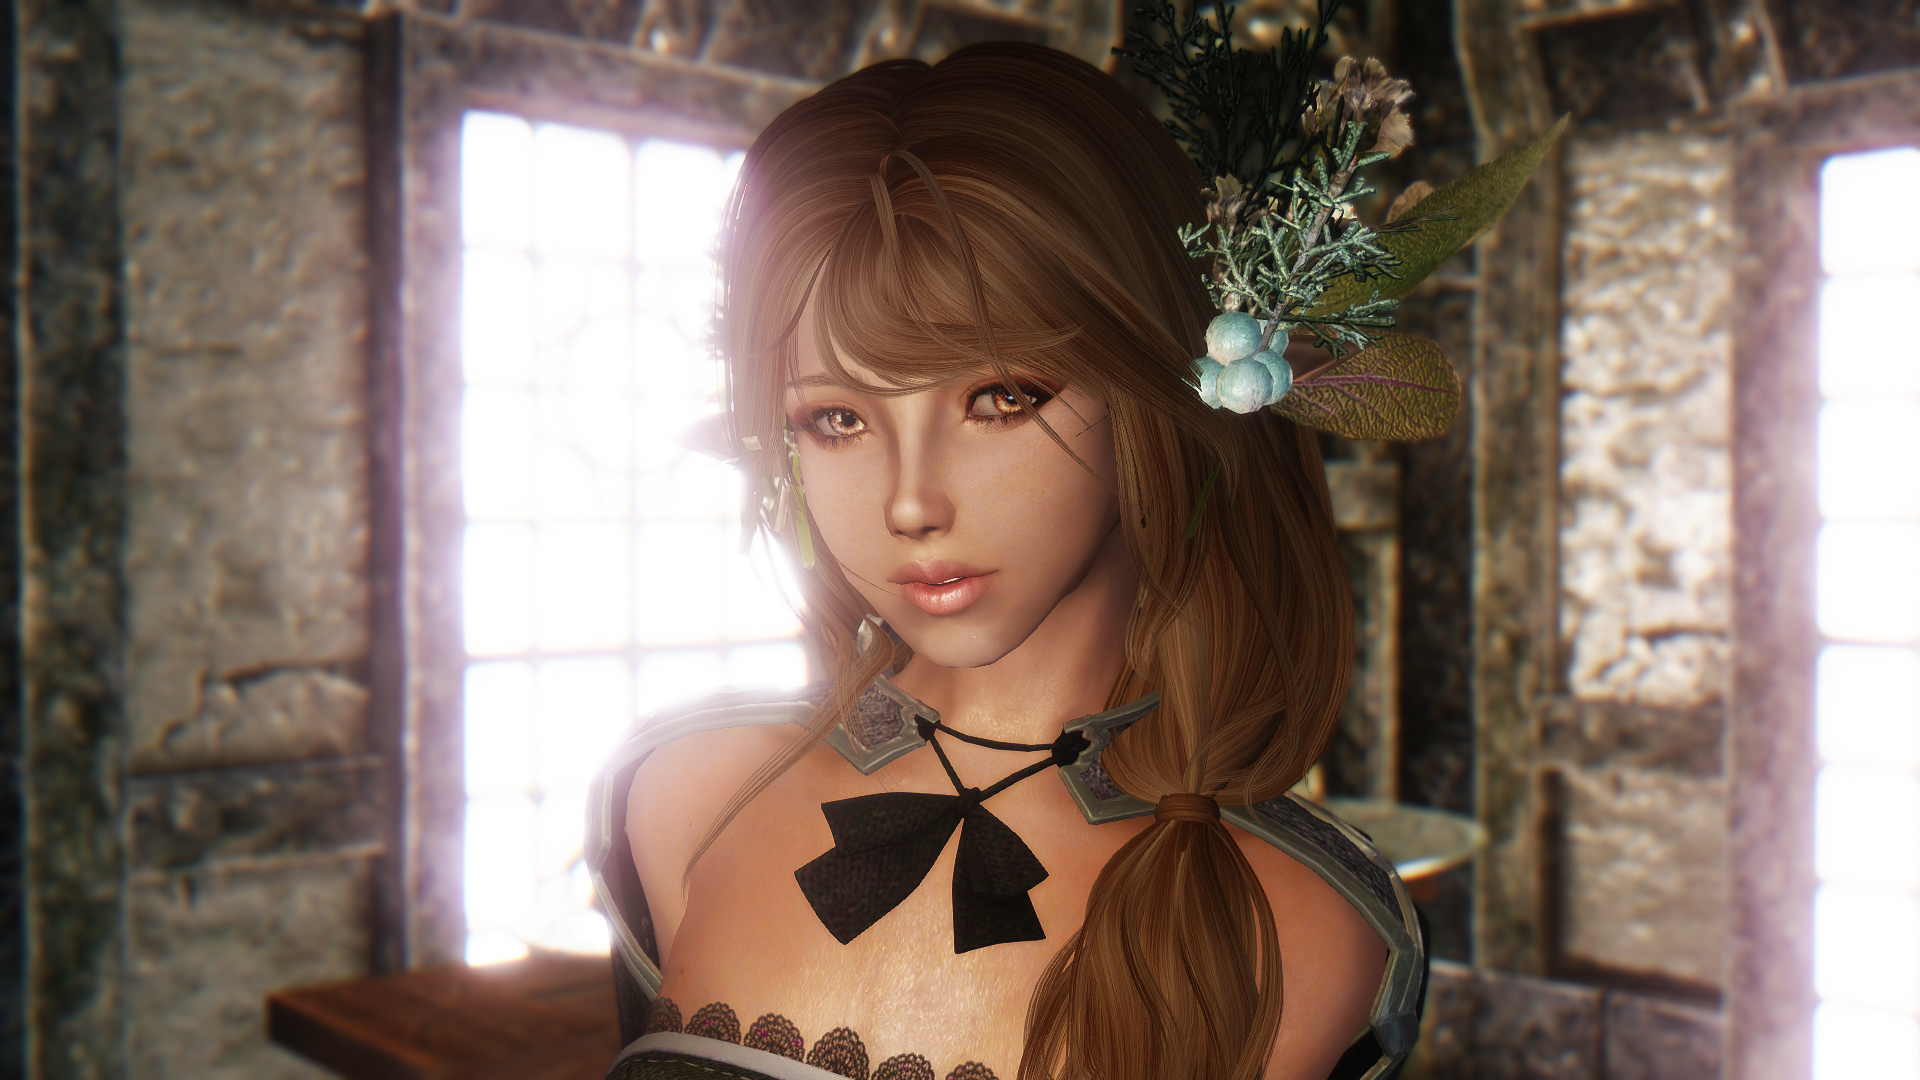 Have a nice Skyrim. please show me some screenshot had her in your game, I ...